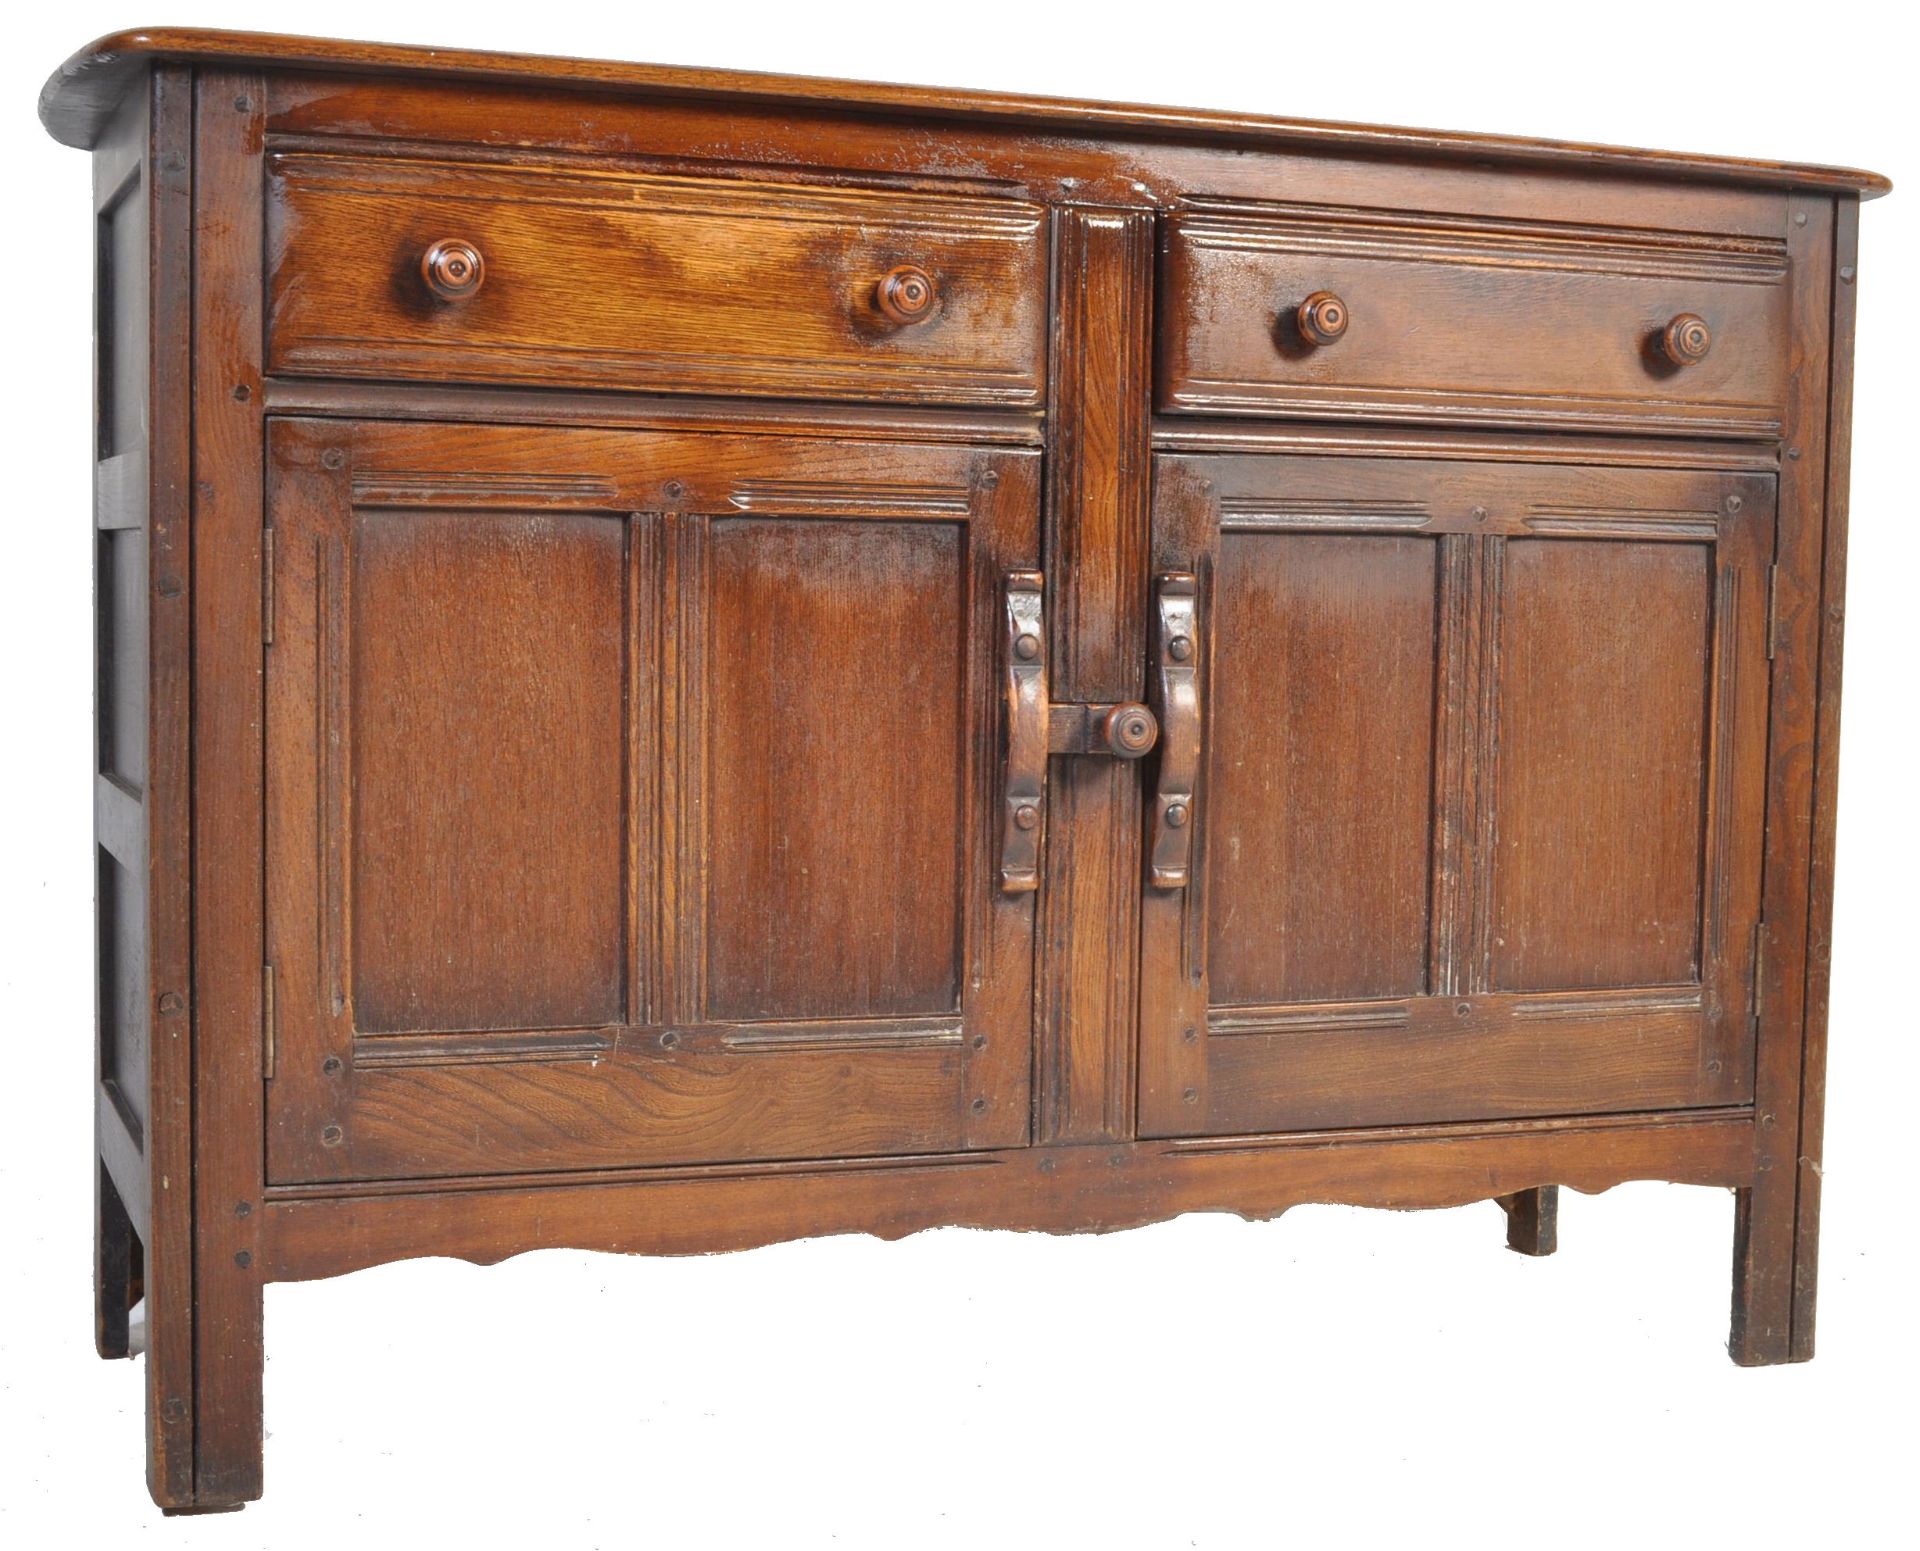 MID 20TH CENTURY ERCOL OLD COLONIAL SIDEBOARD CREDENZA